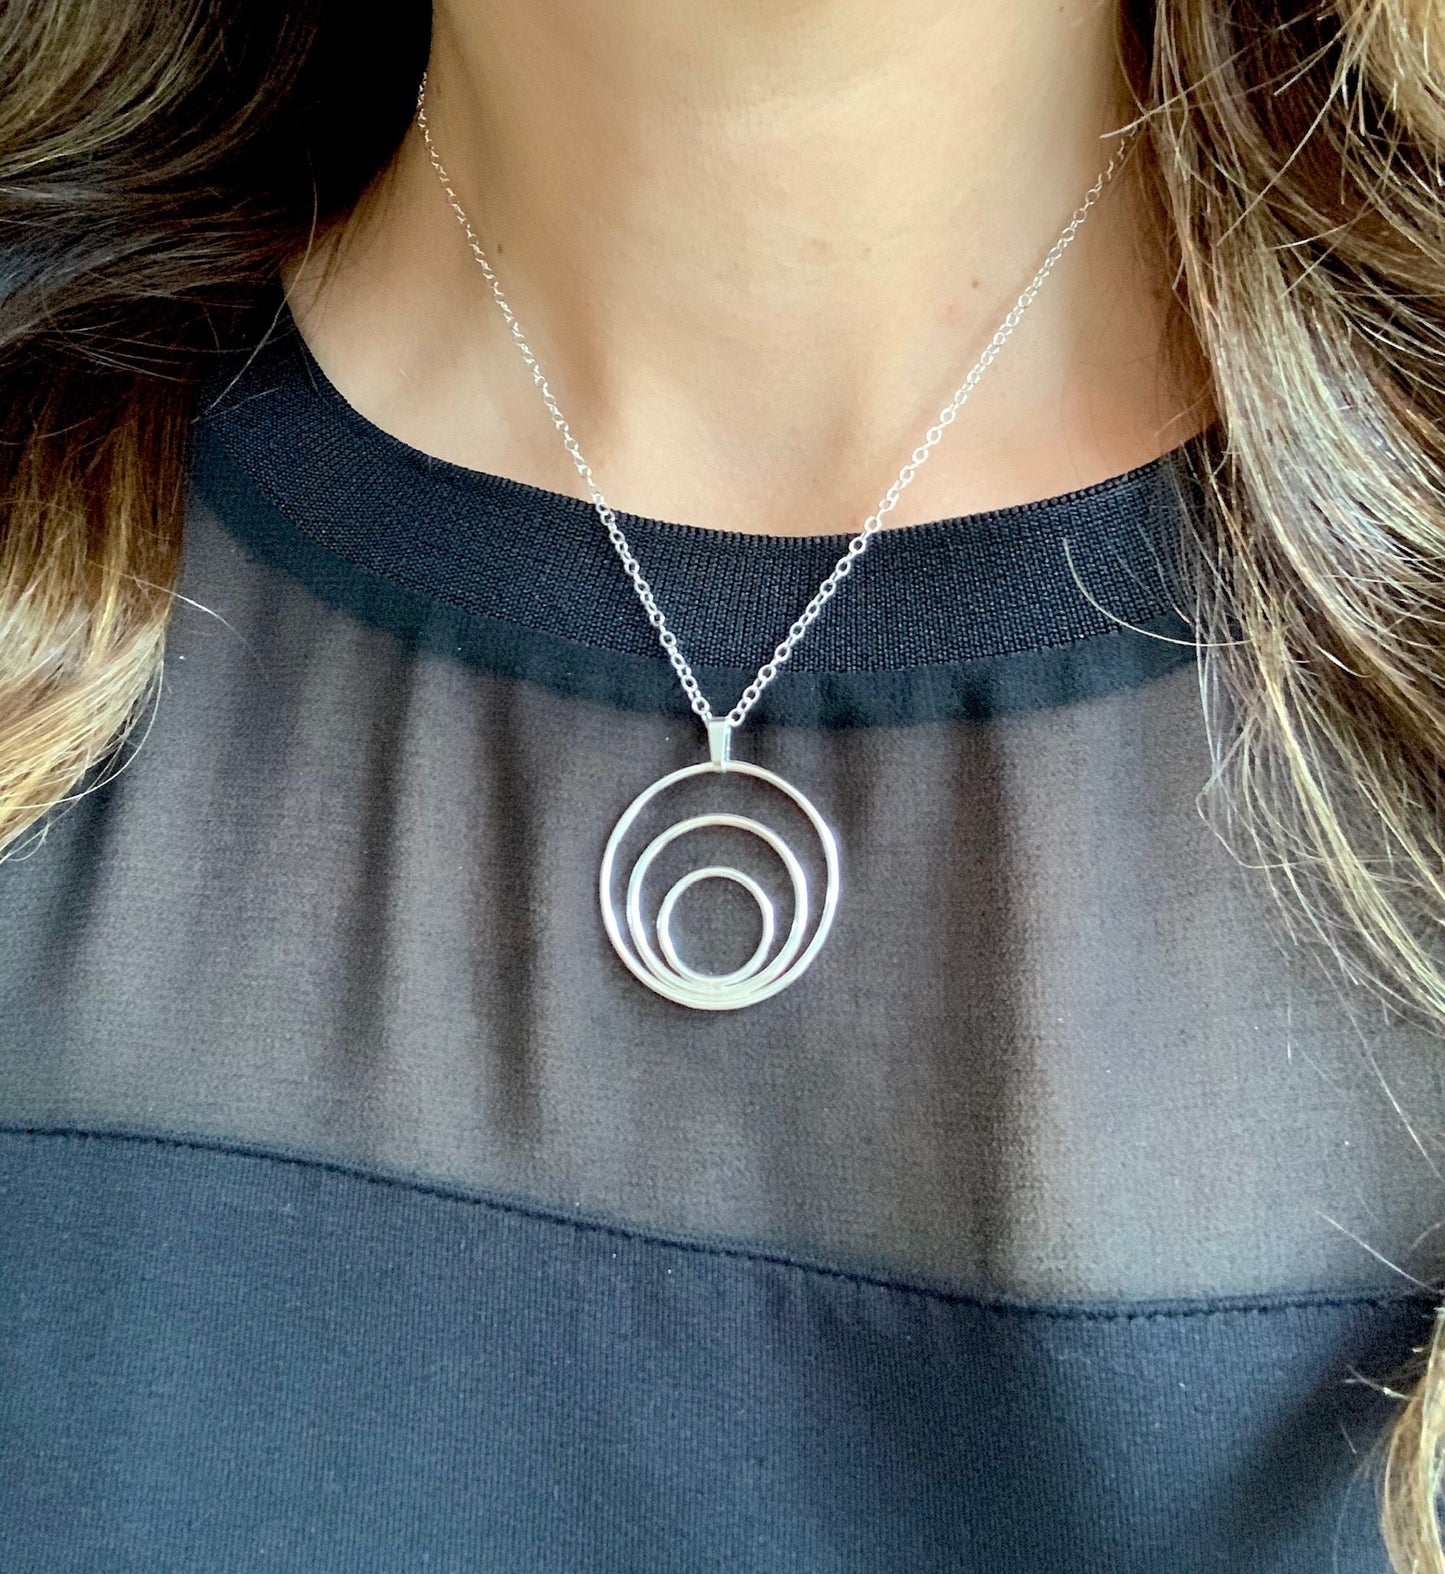 Silver three circles necklace, large silver circle necklace